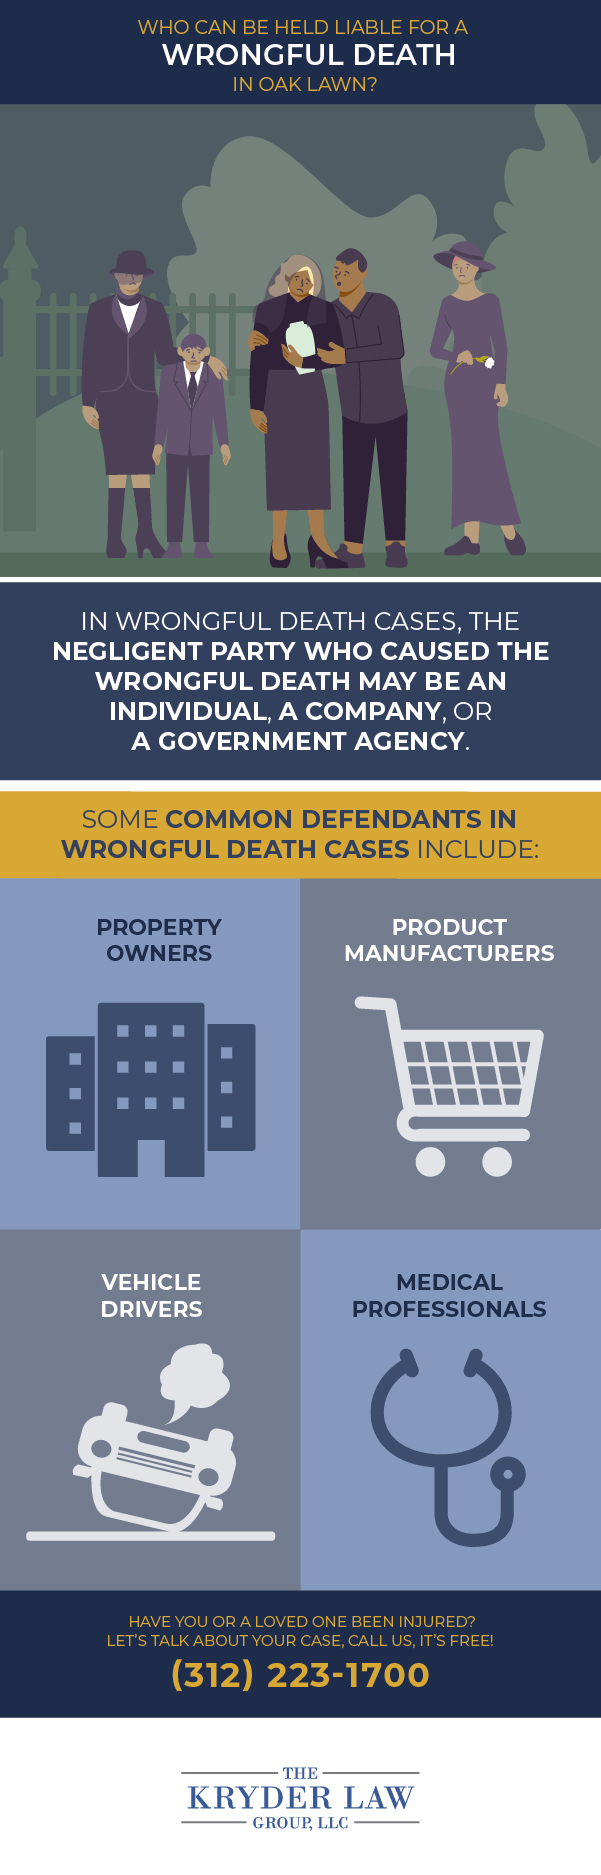 The Benefits of Hiring an Oak Lawn Wrongful Death Lawyer Infographic